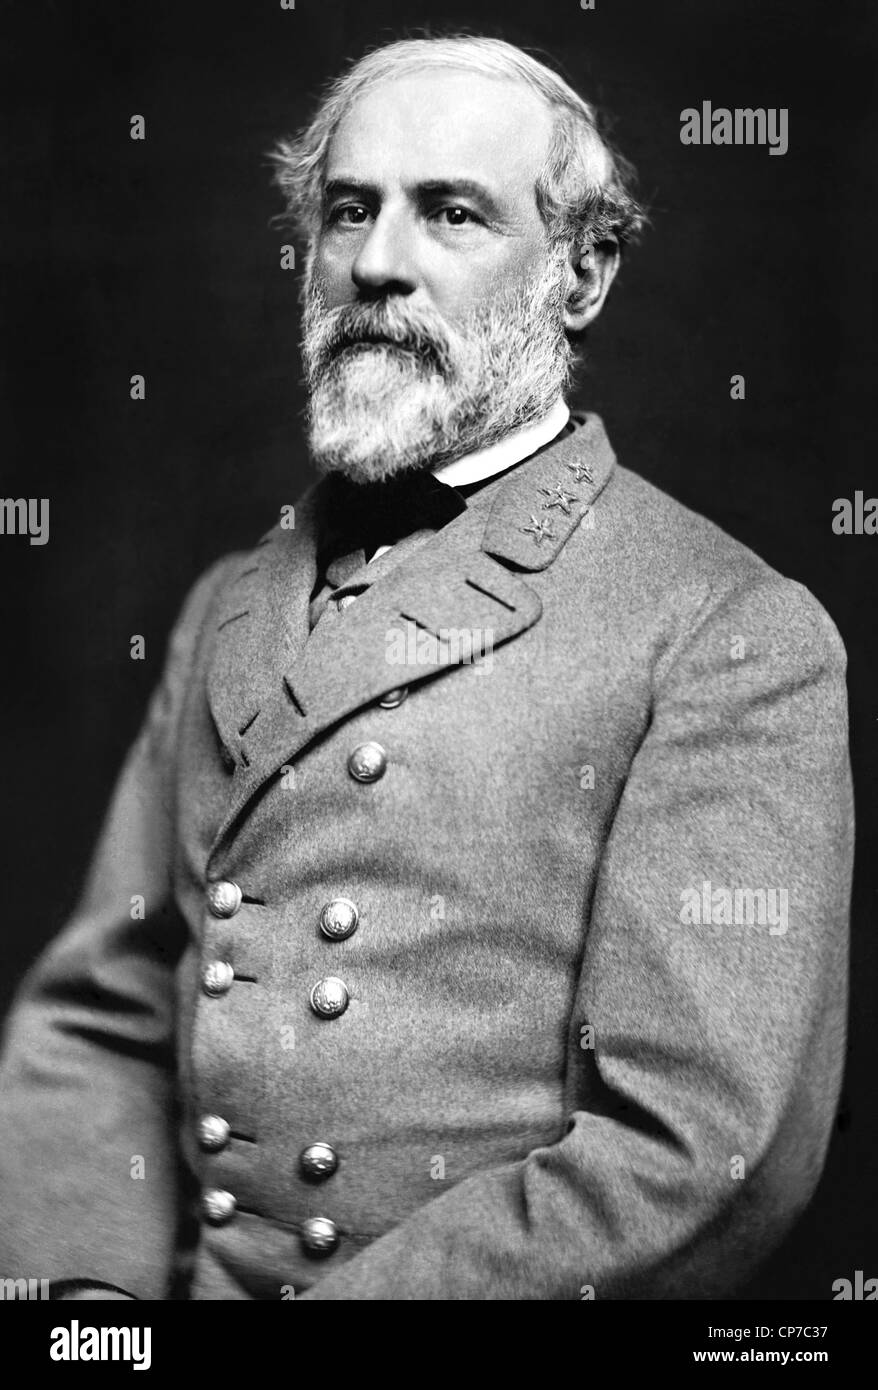 Portrait of Gen. Robert E. Lee, officer of the Confederate Army. Dated 1863. Stock Photo